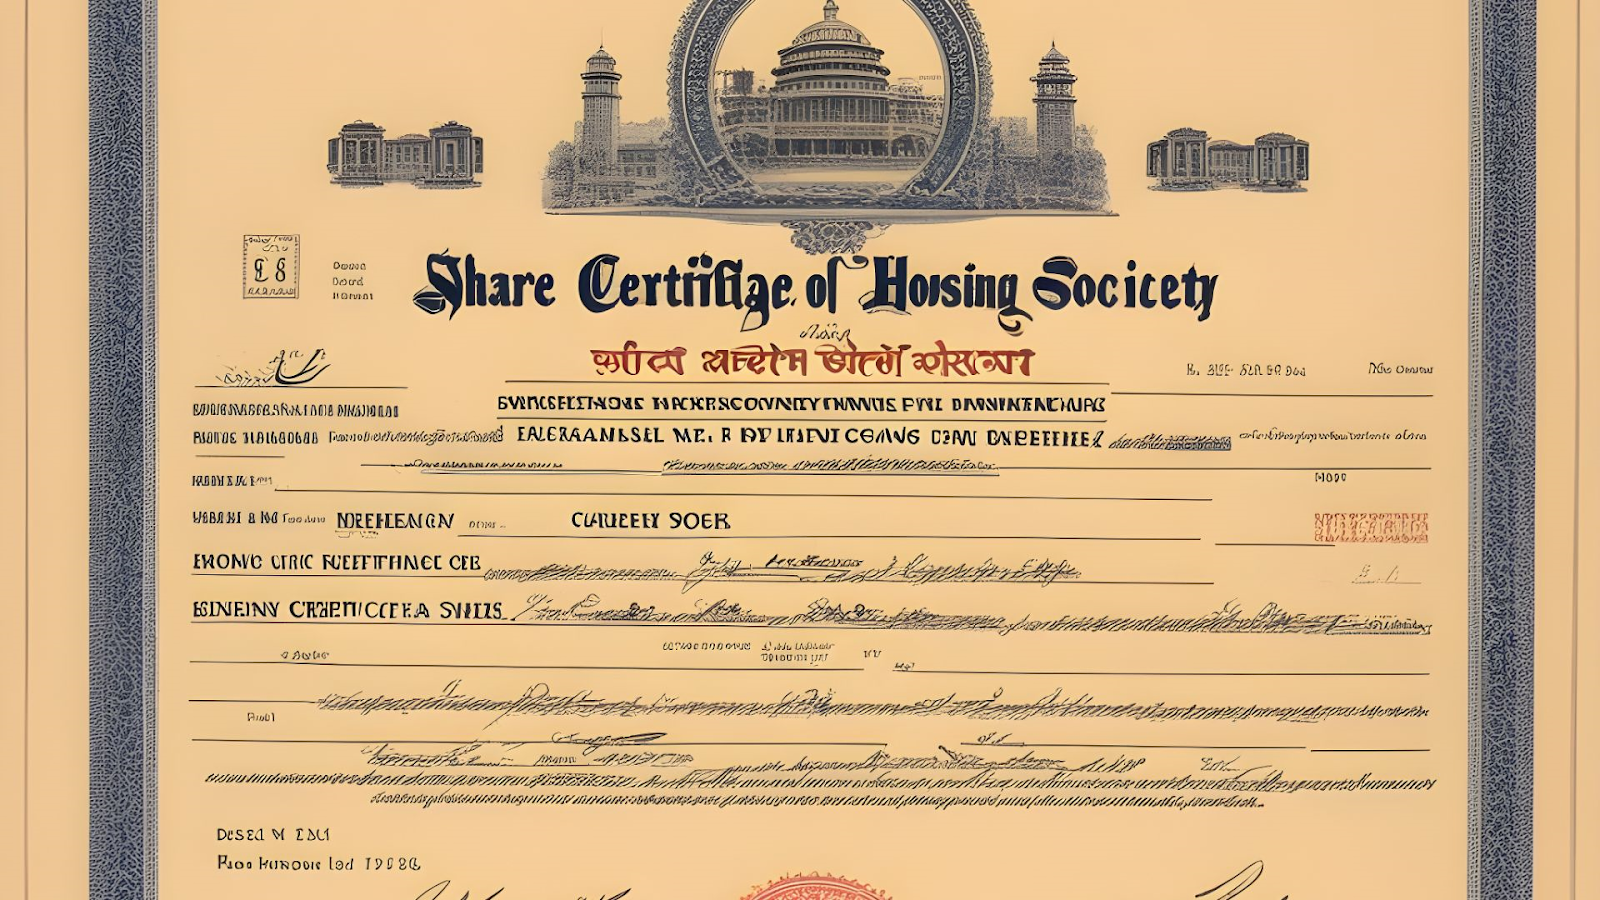 A certificate that acknowledges you as a member of the housing society.